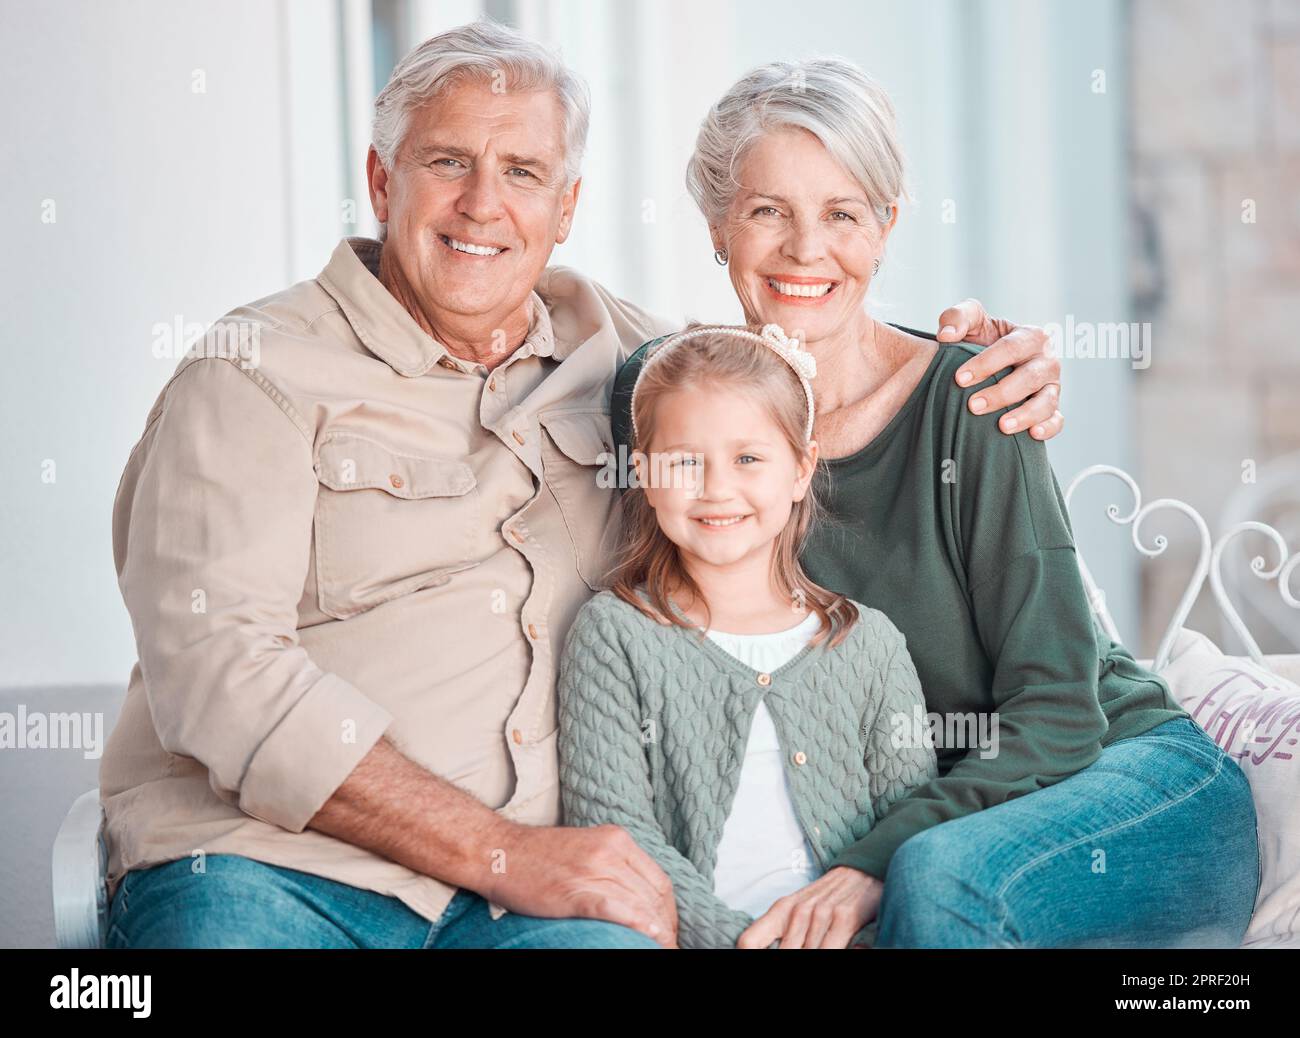 Portrait of a cheerful little girl and her grandparents sitting on the couch together during a visit at home. Loving grandparents bonding with their g Stock Photo